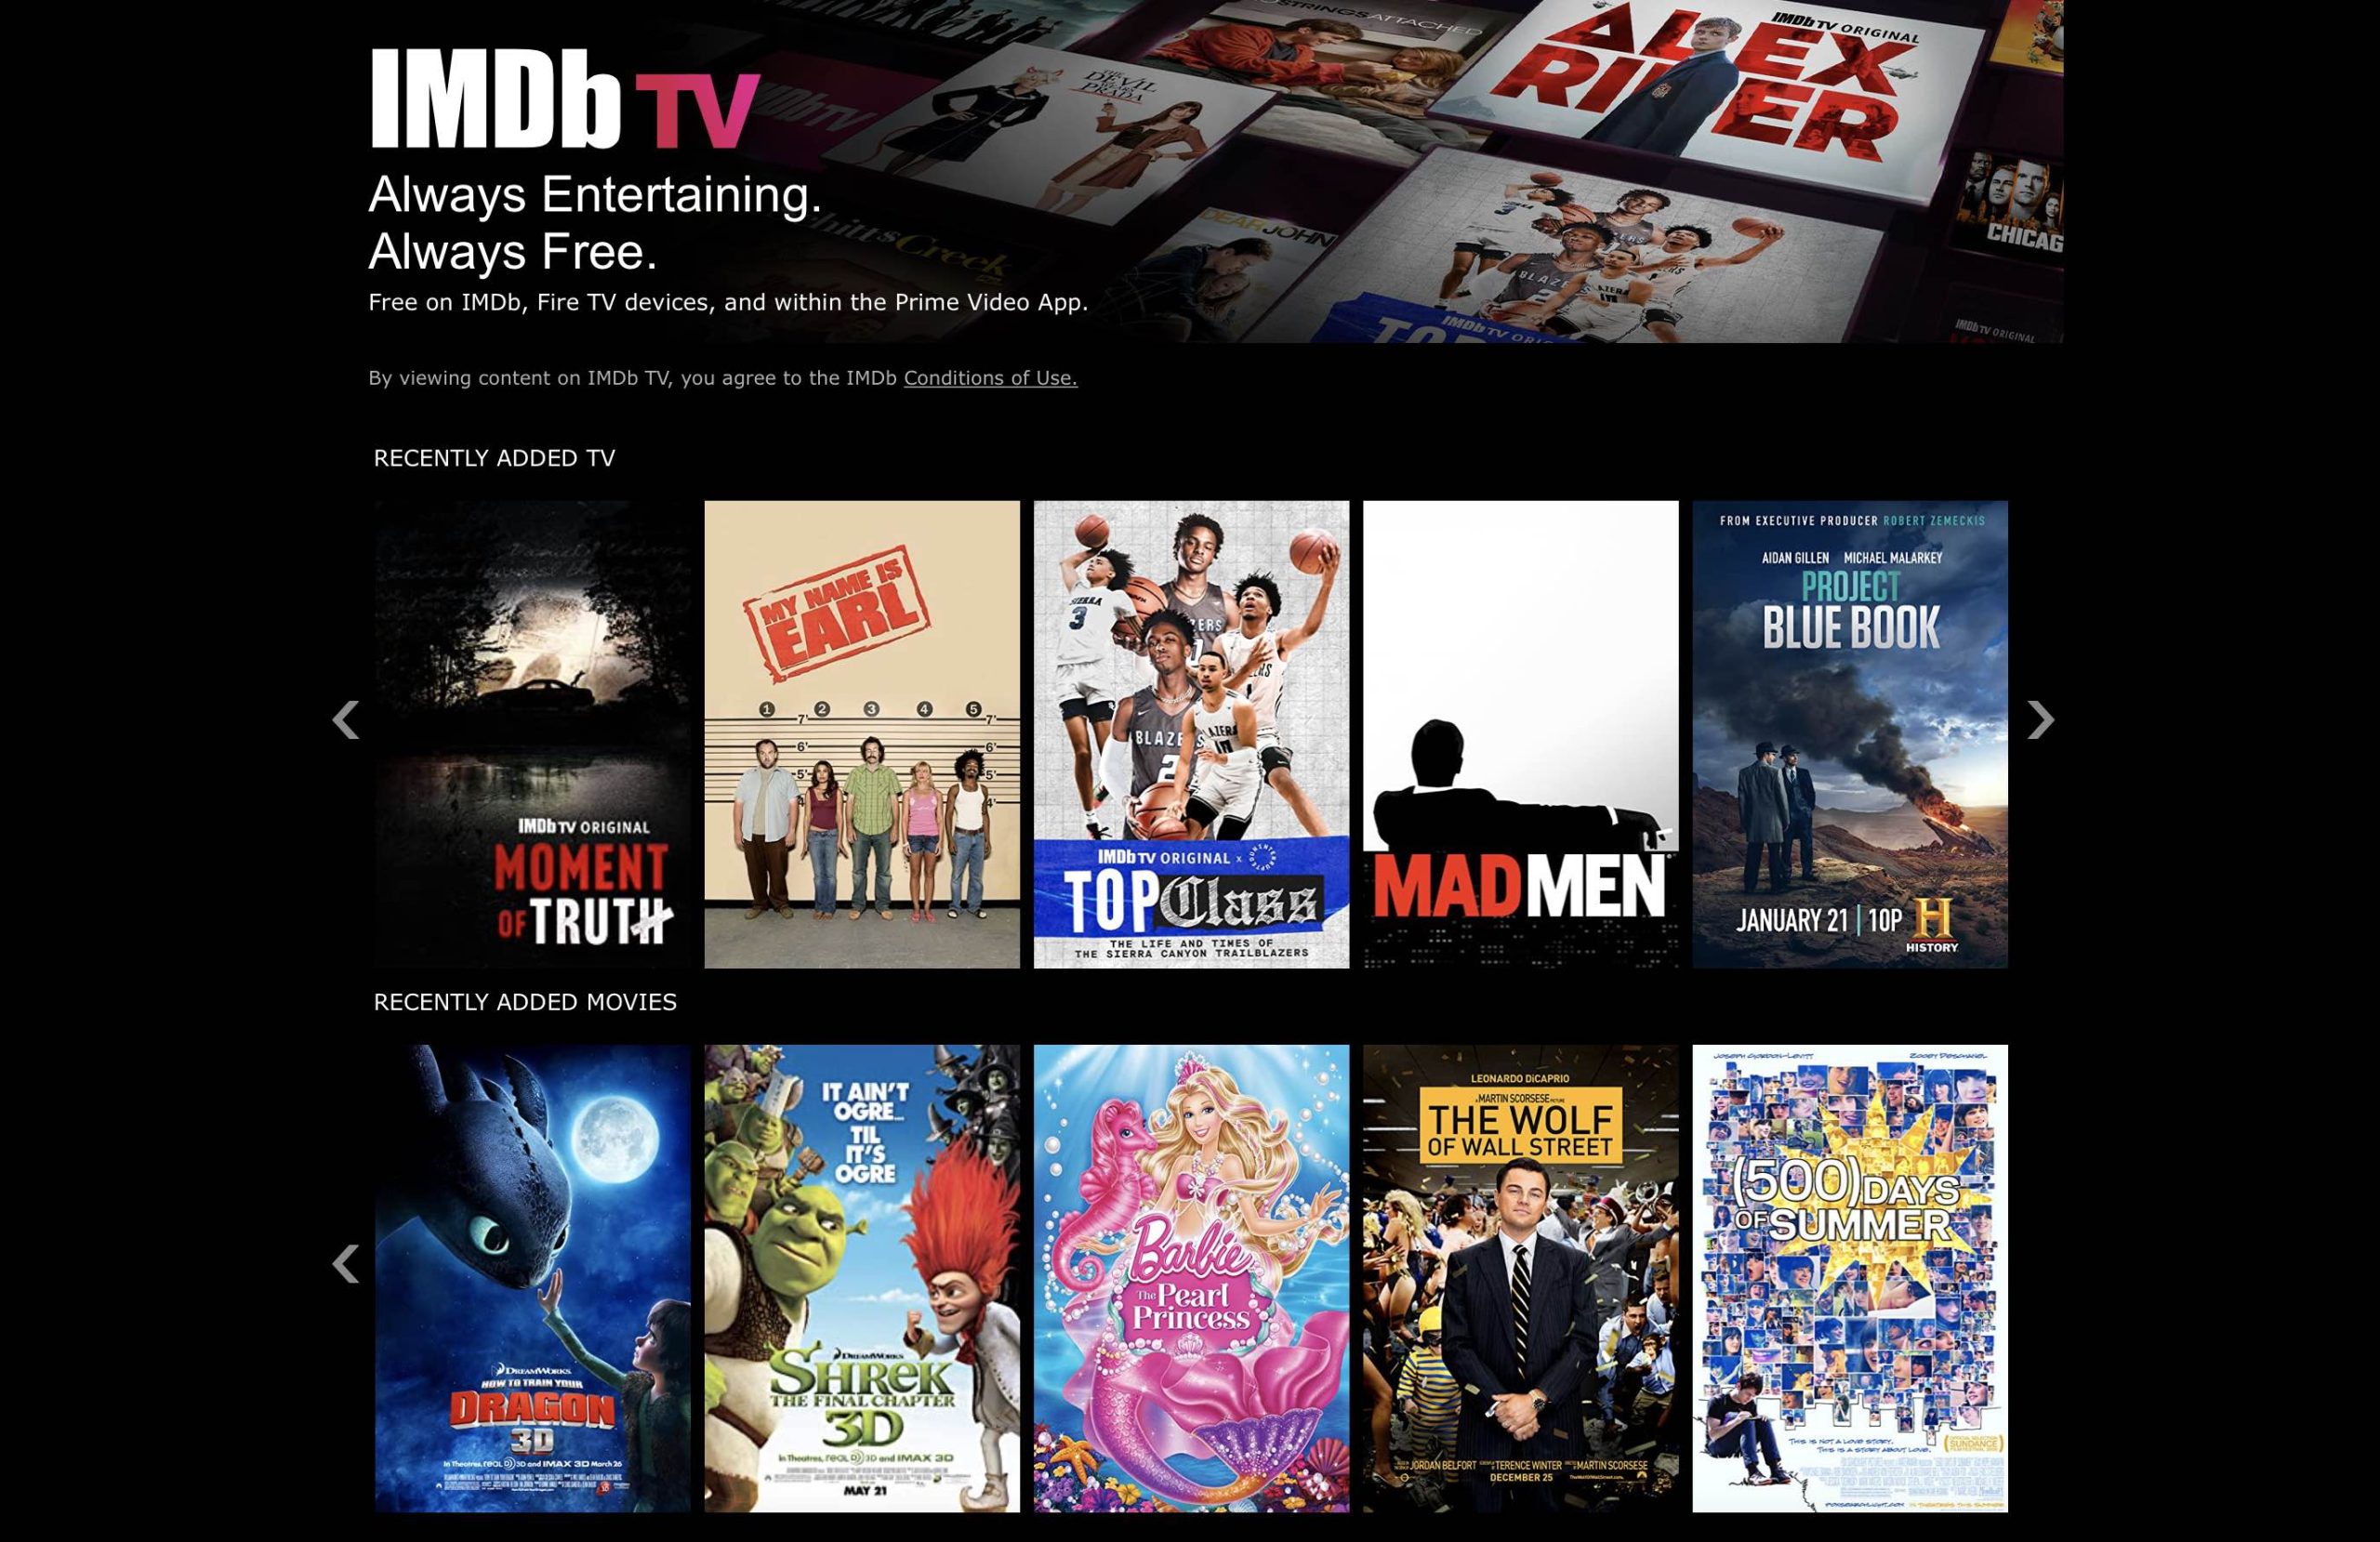 Connected TV Advertising on IMDb